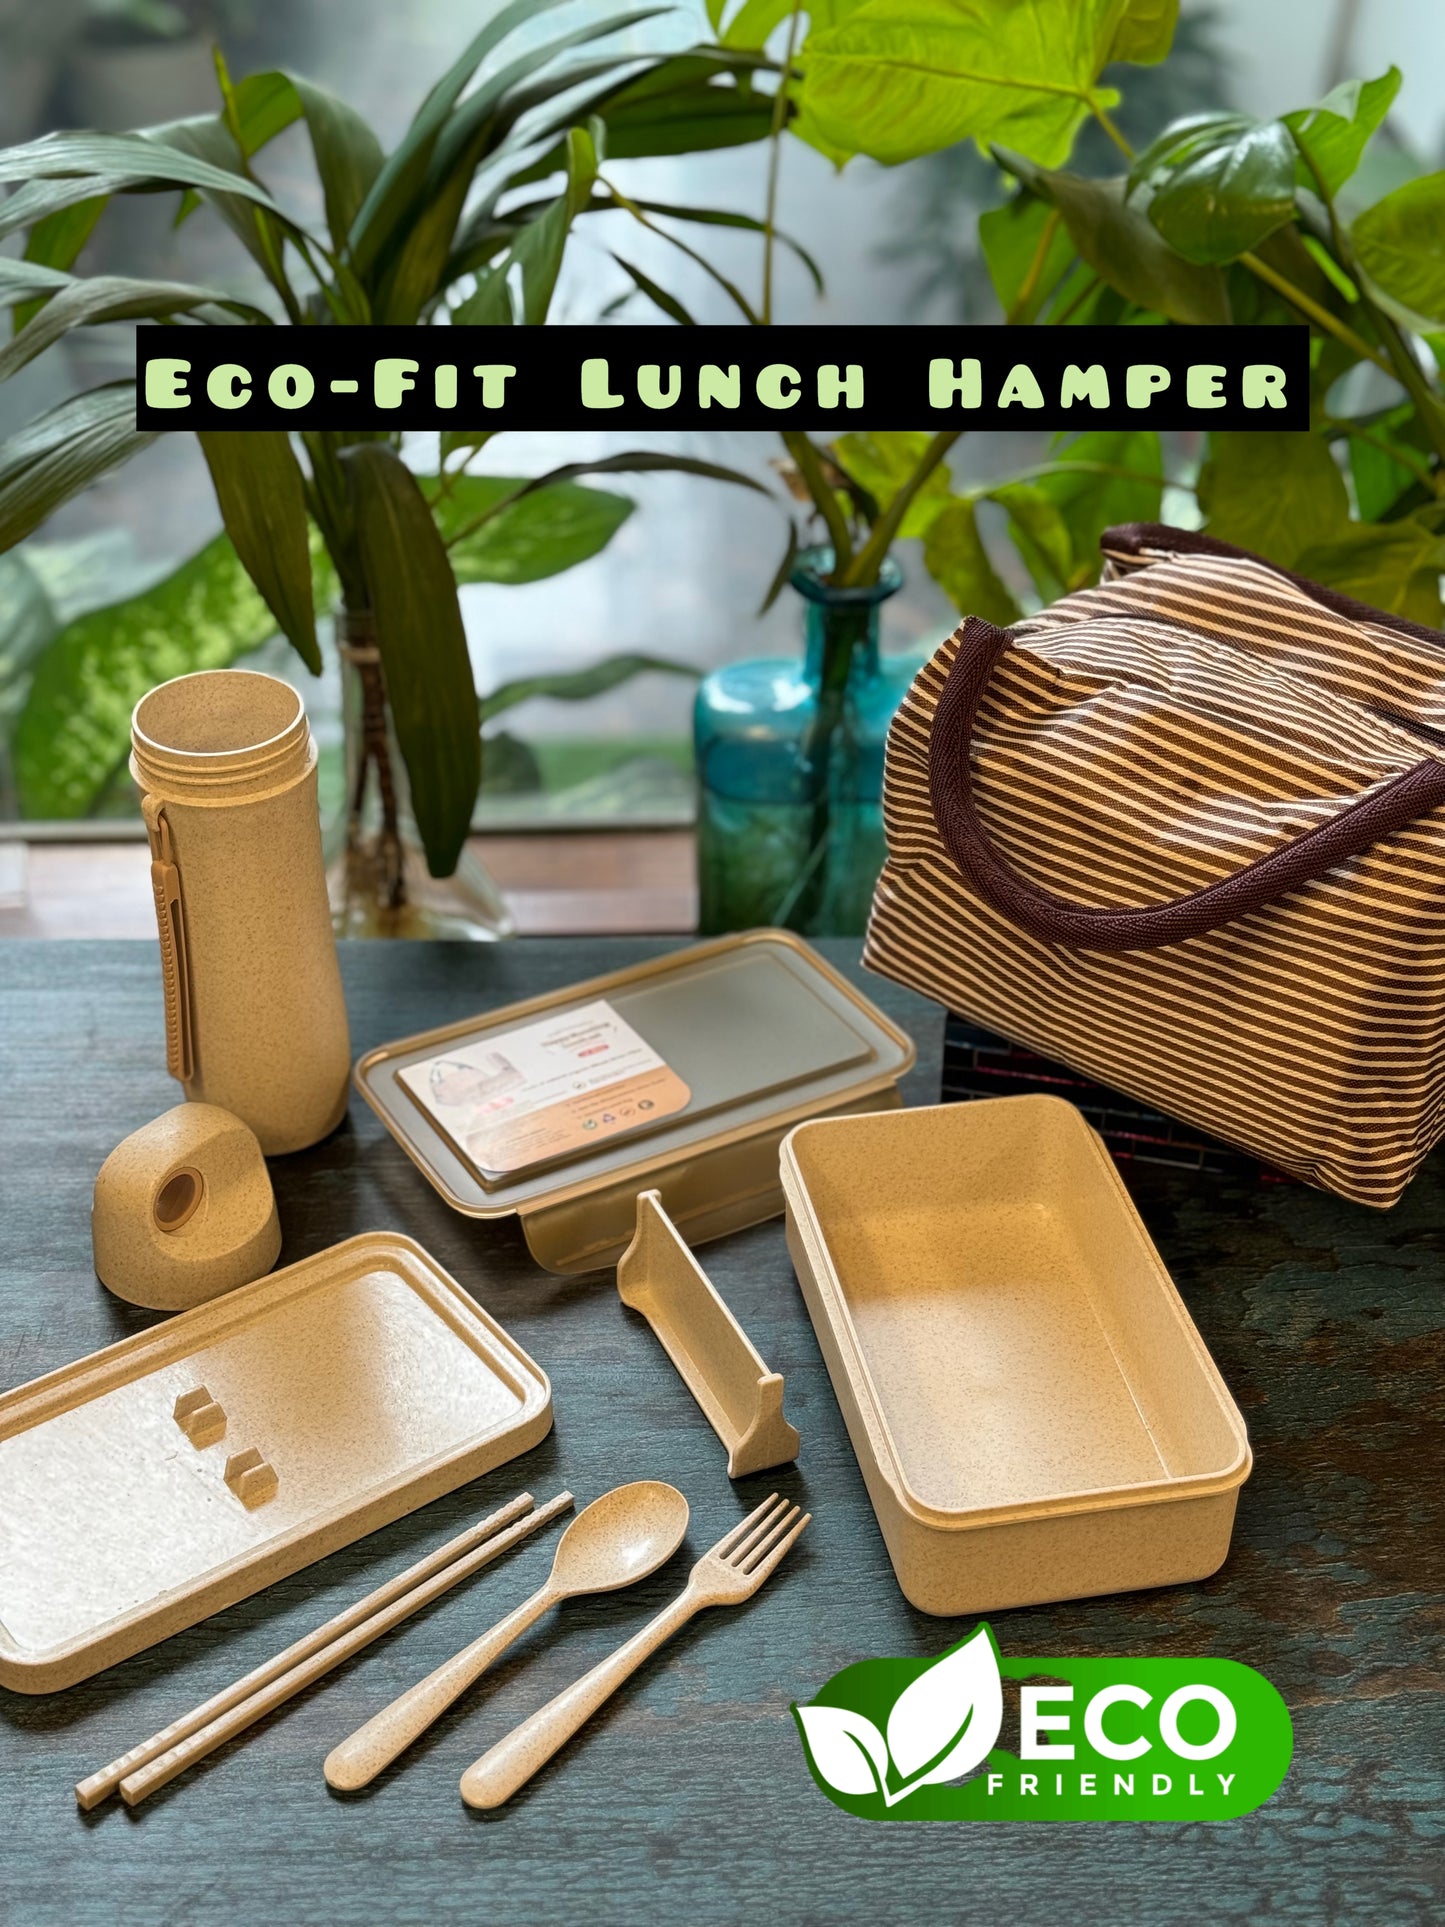 Eco-fit Lunch Hamper